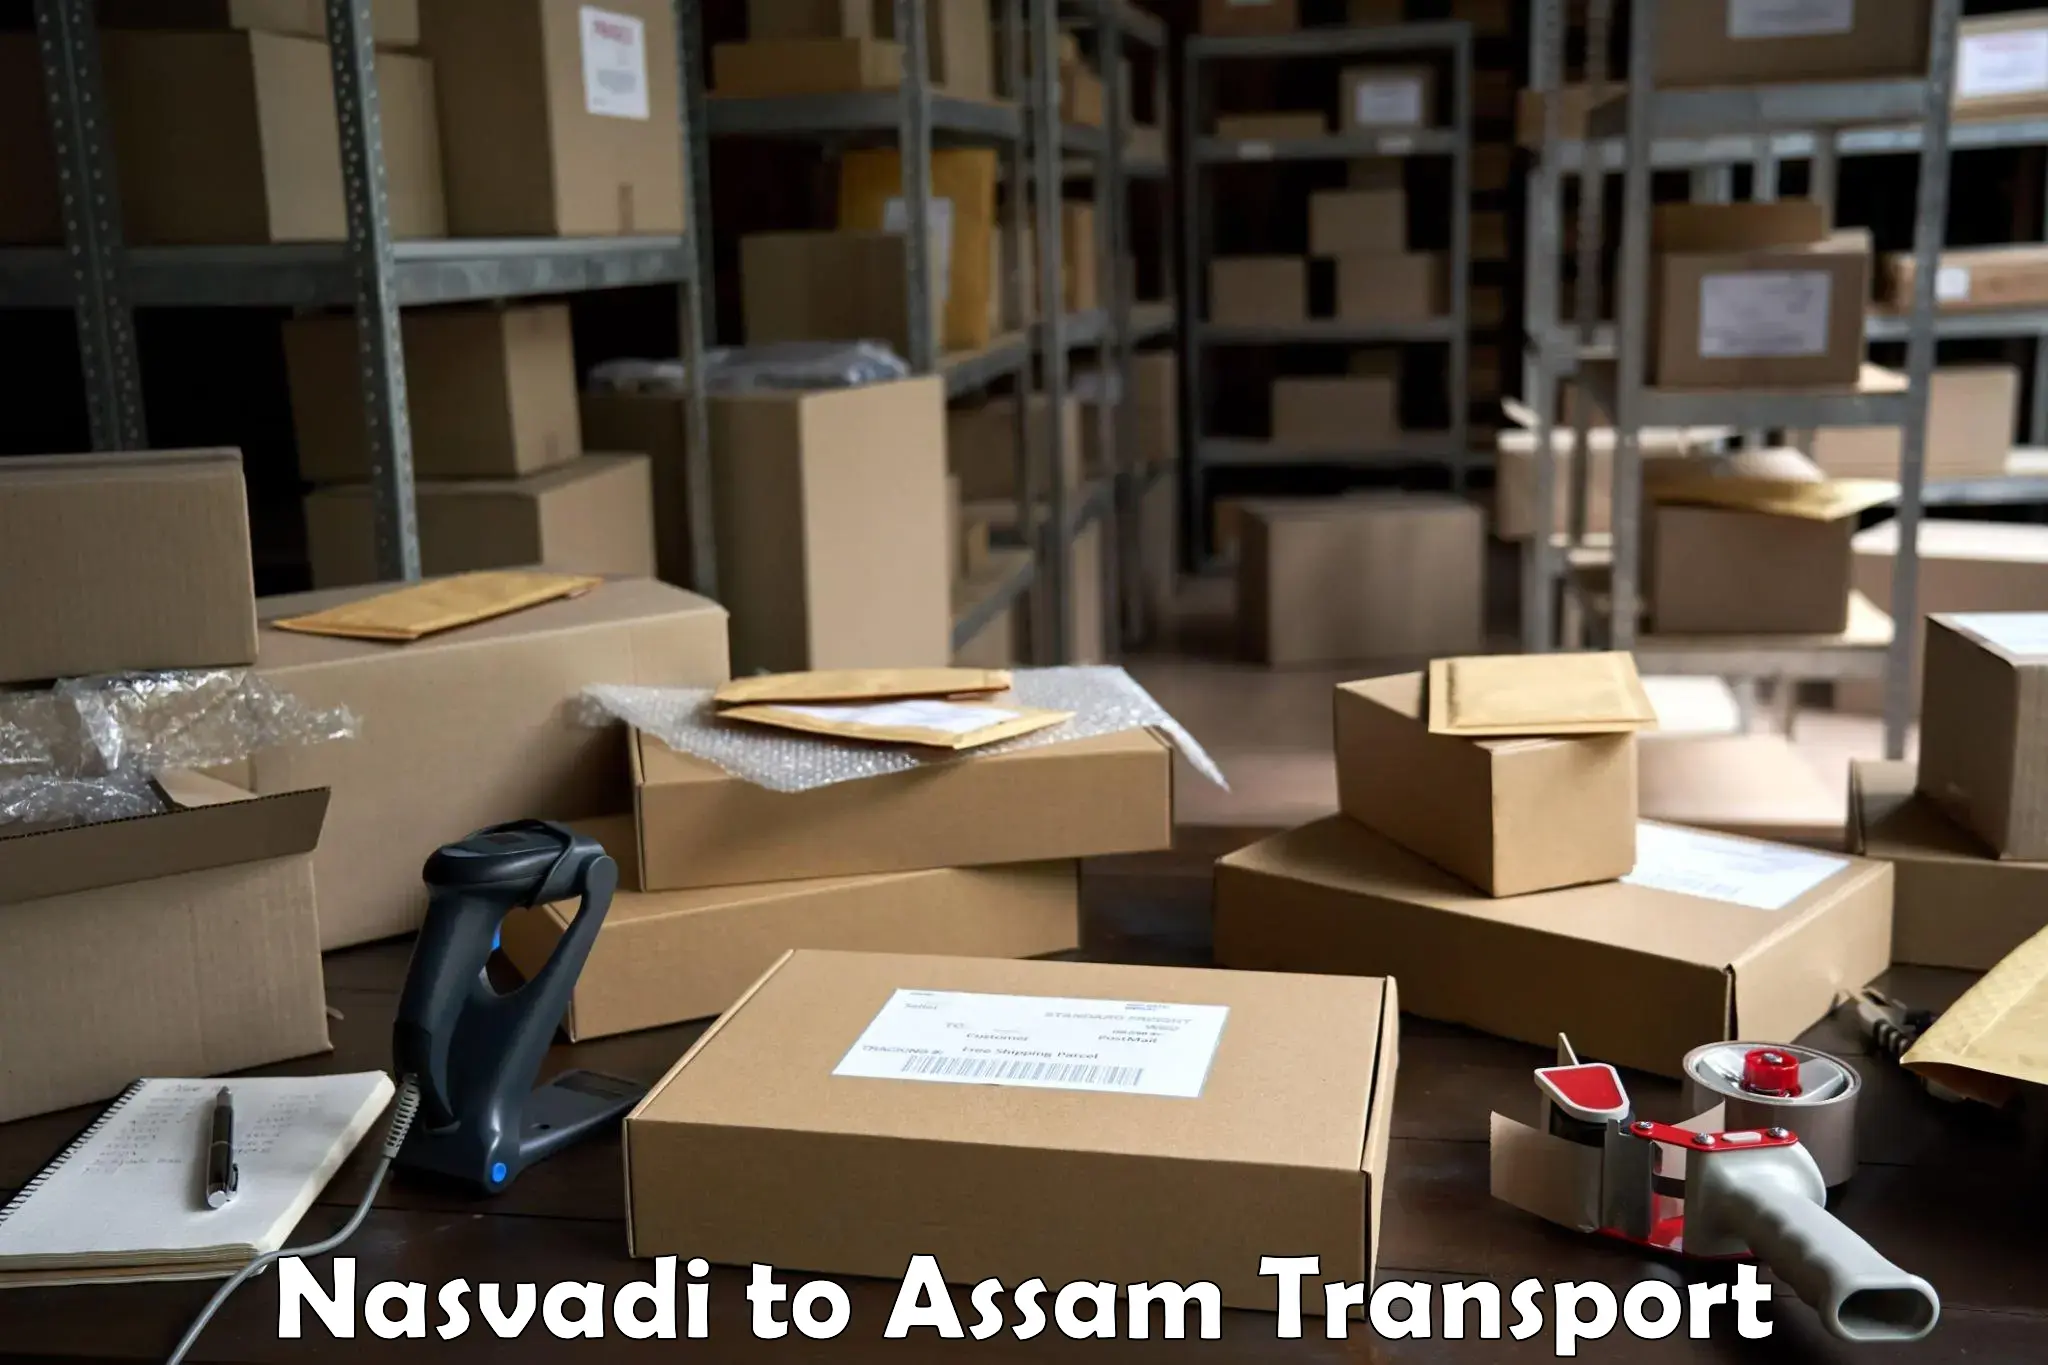 Transport bike from one state to another Nasvadi to Lala Assam